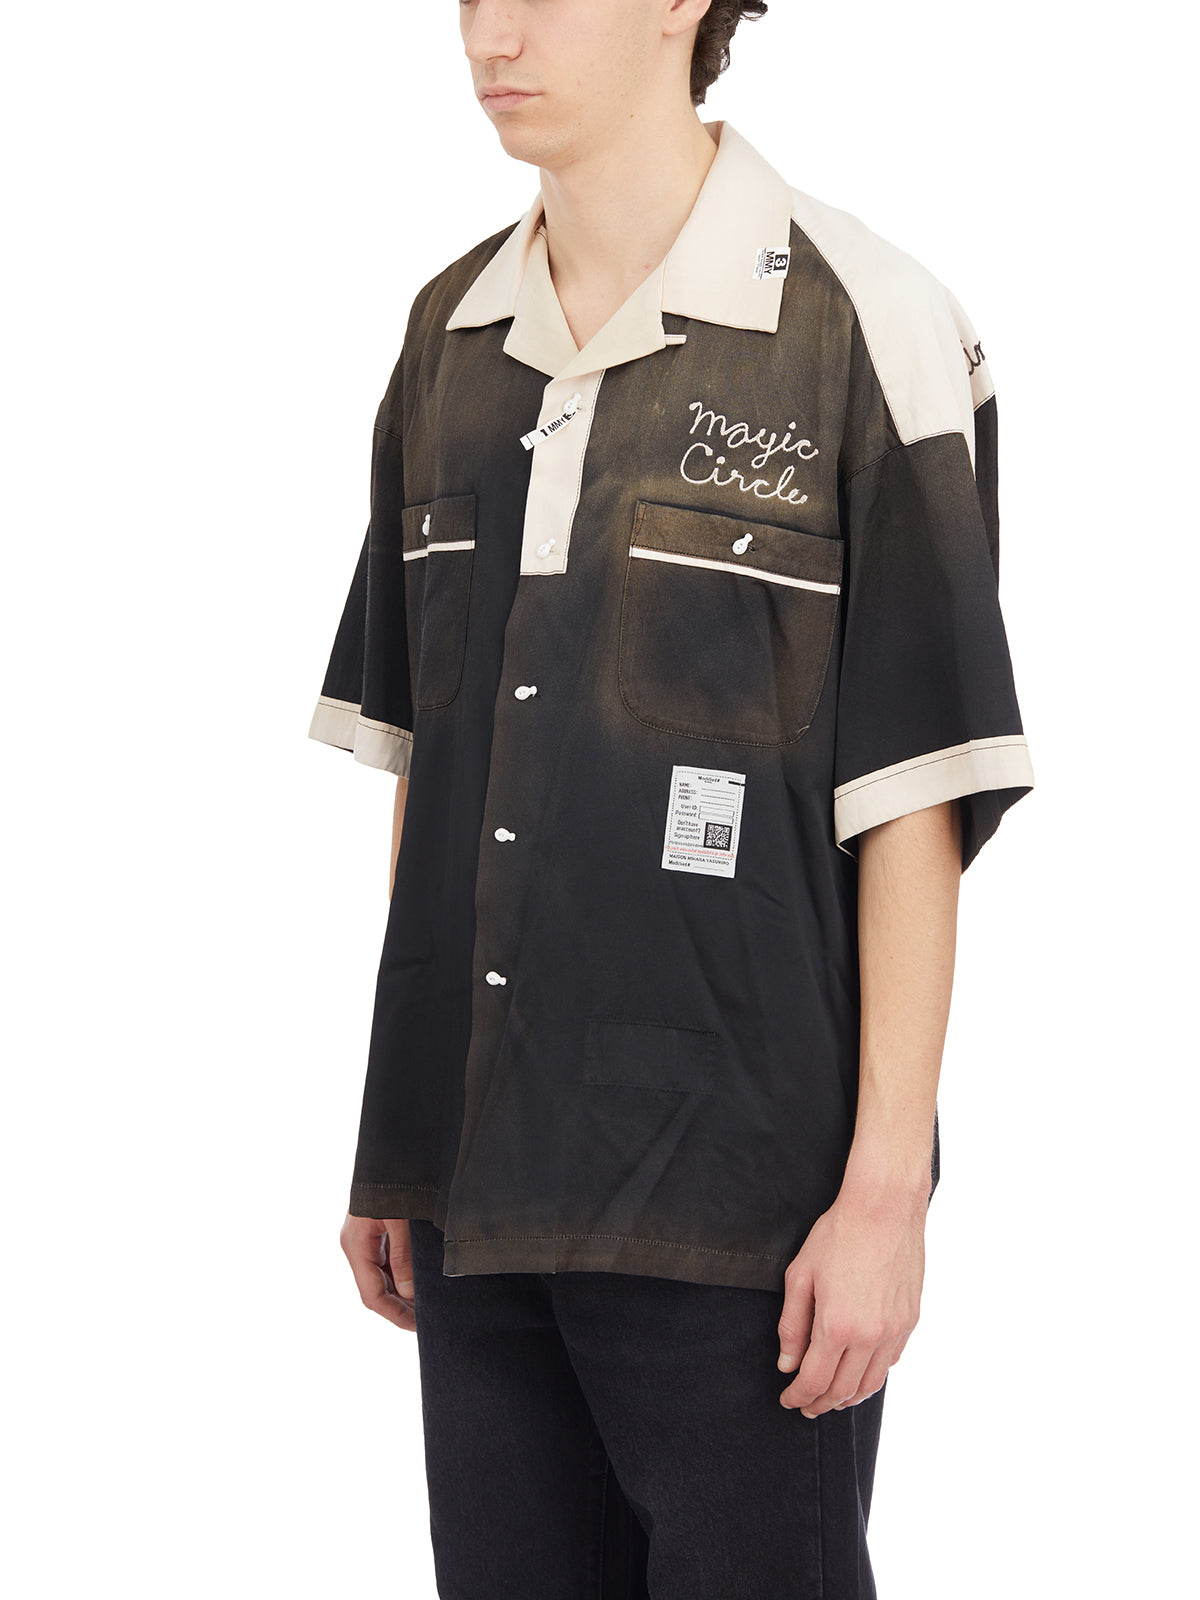 MAISON MIHARA YASUHIRO	 Men's Two-Tone Bowling Shirt with Vintage Finish and Embroidered Design